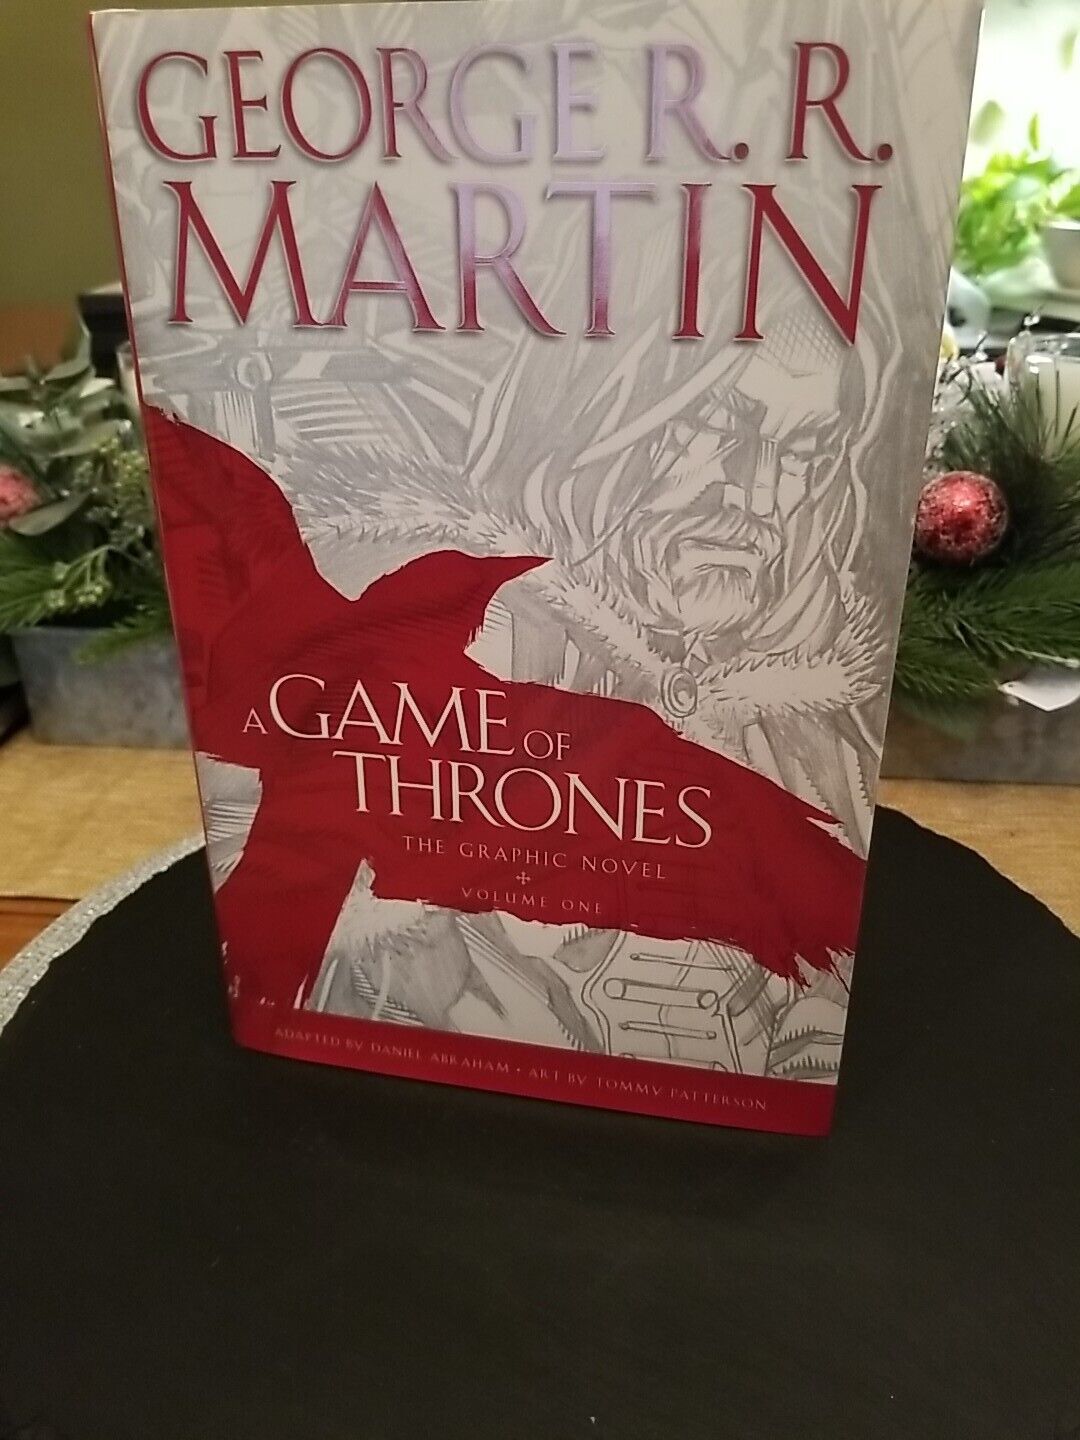 A Game of Thrones #1 (2012), George R.R.Martin, Hardcover